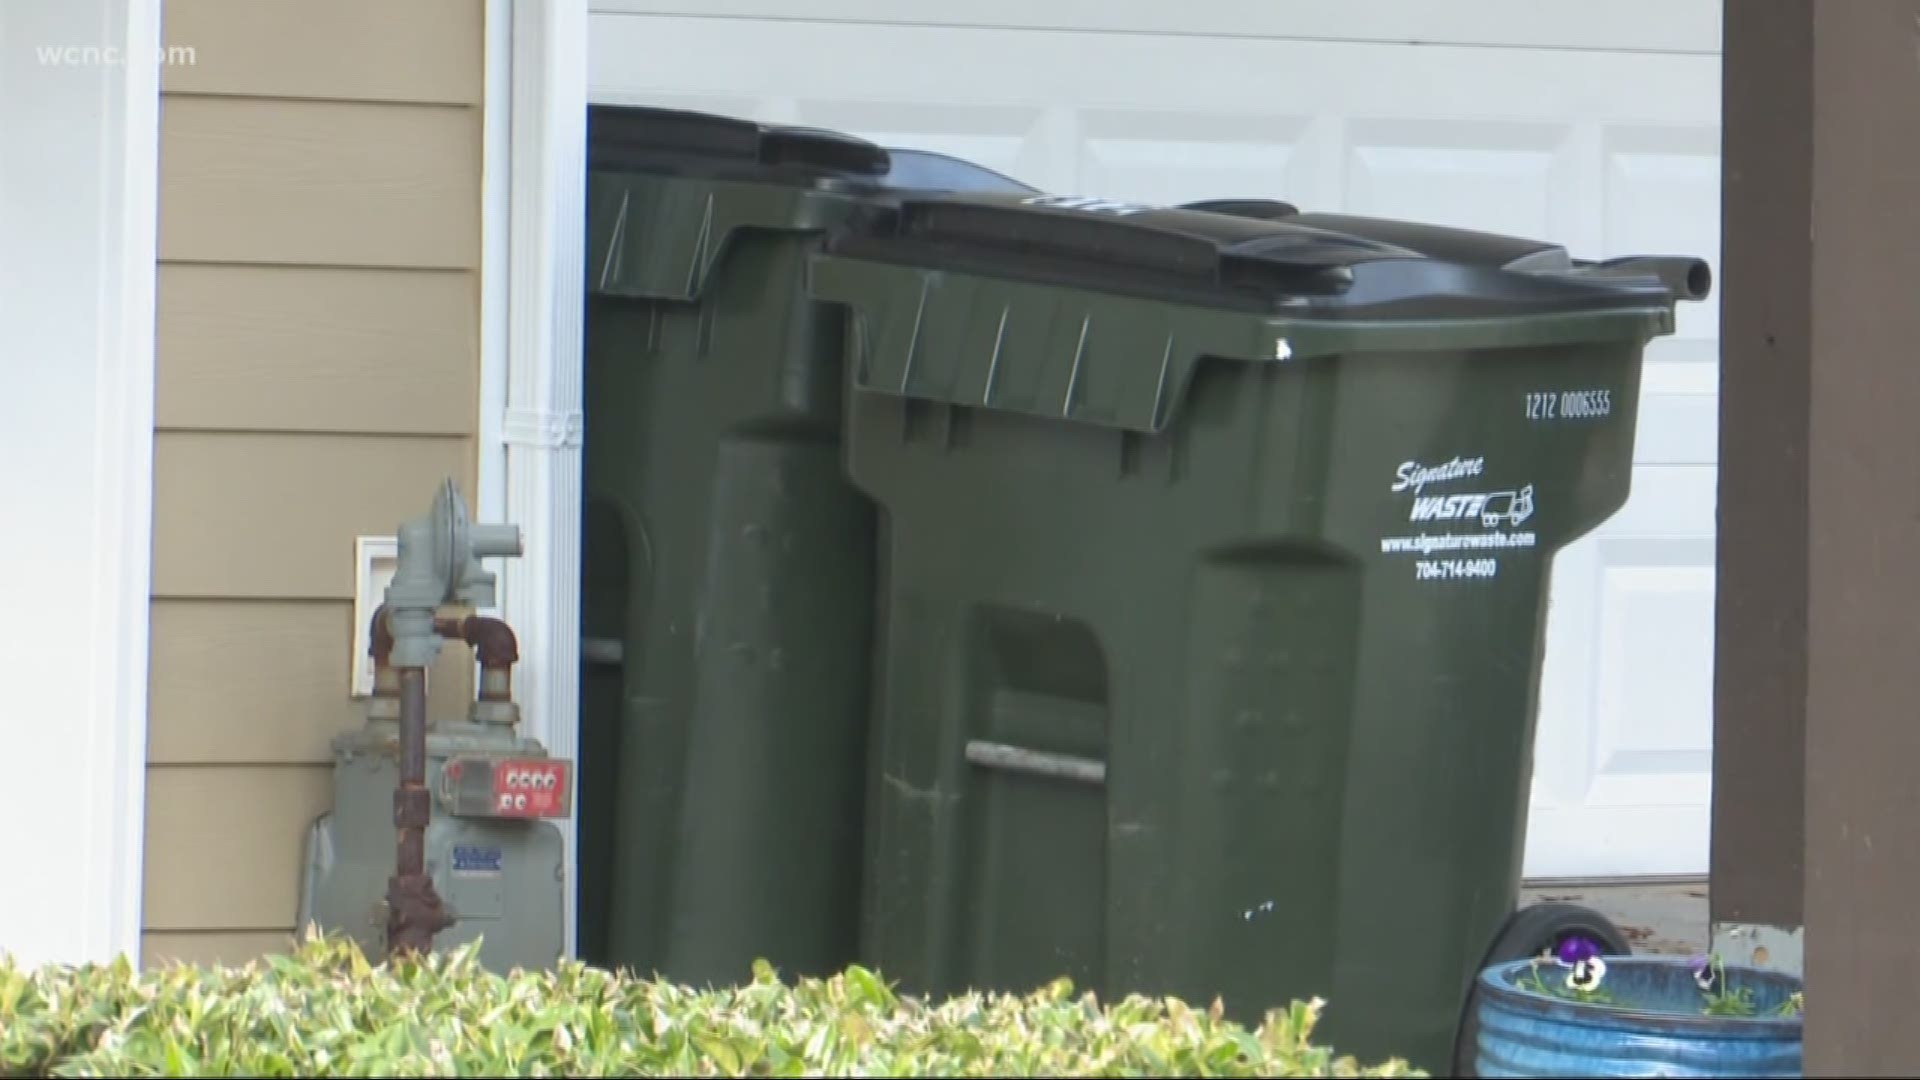 On average, Signature Waste serves nearly 12,000 customers in the Charlotte area.